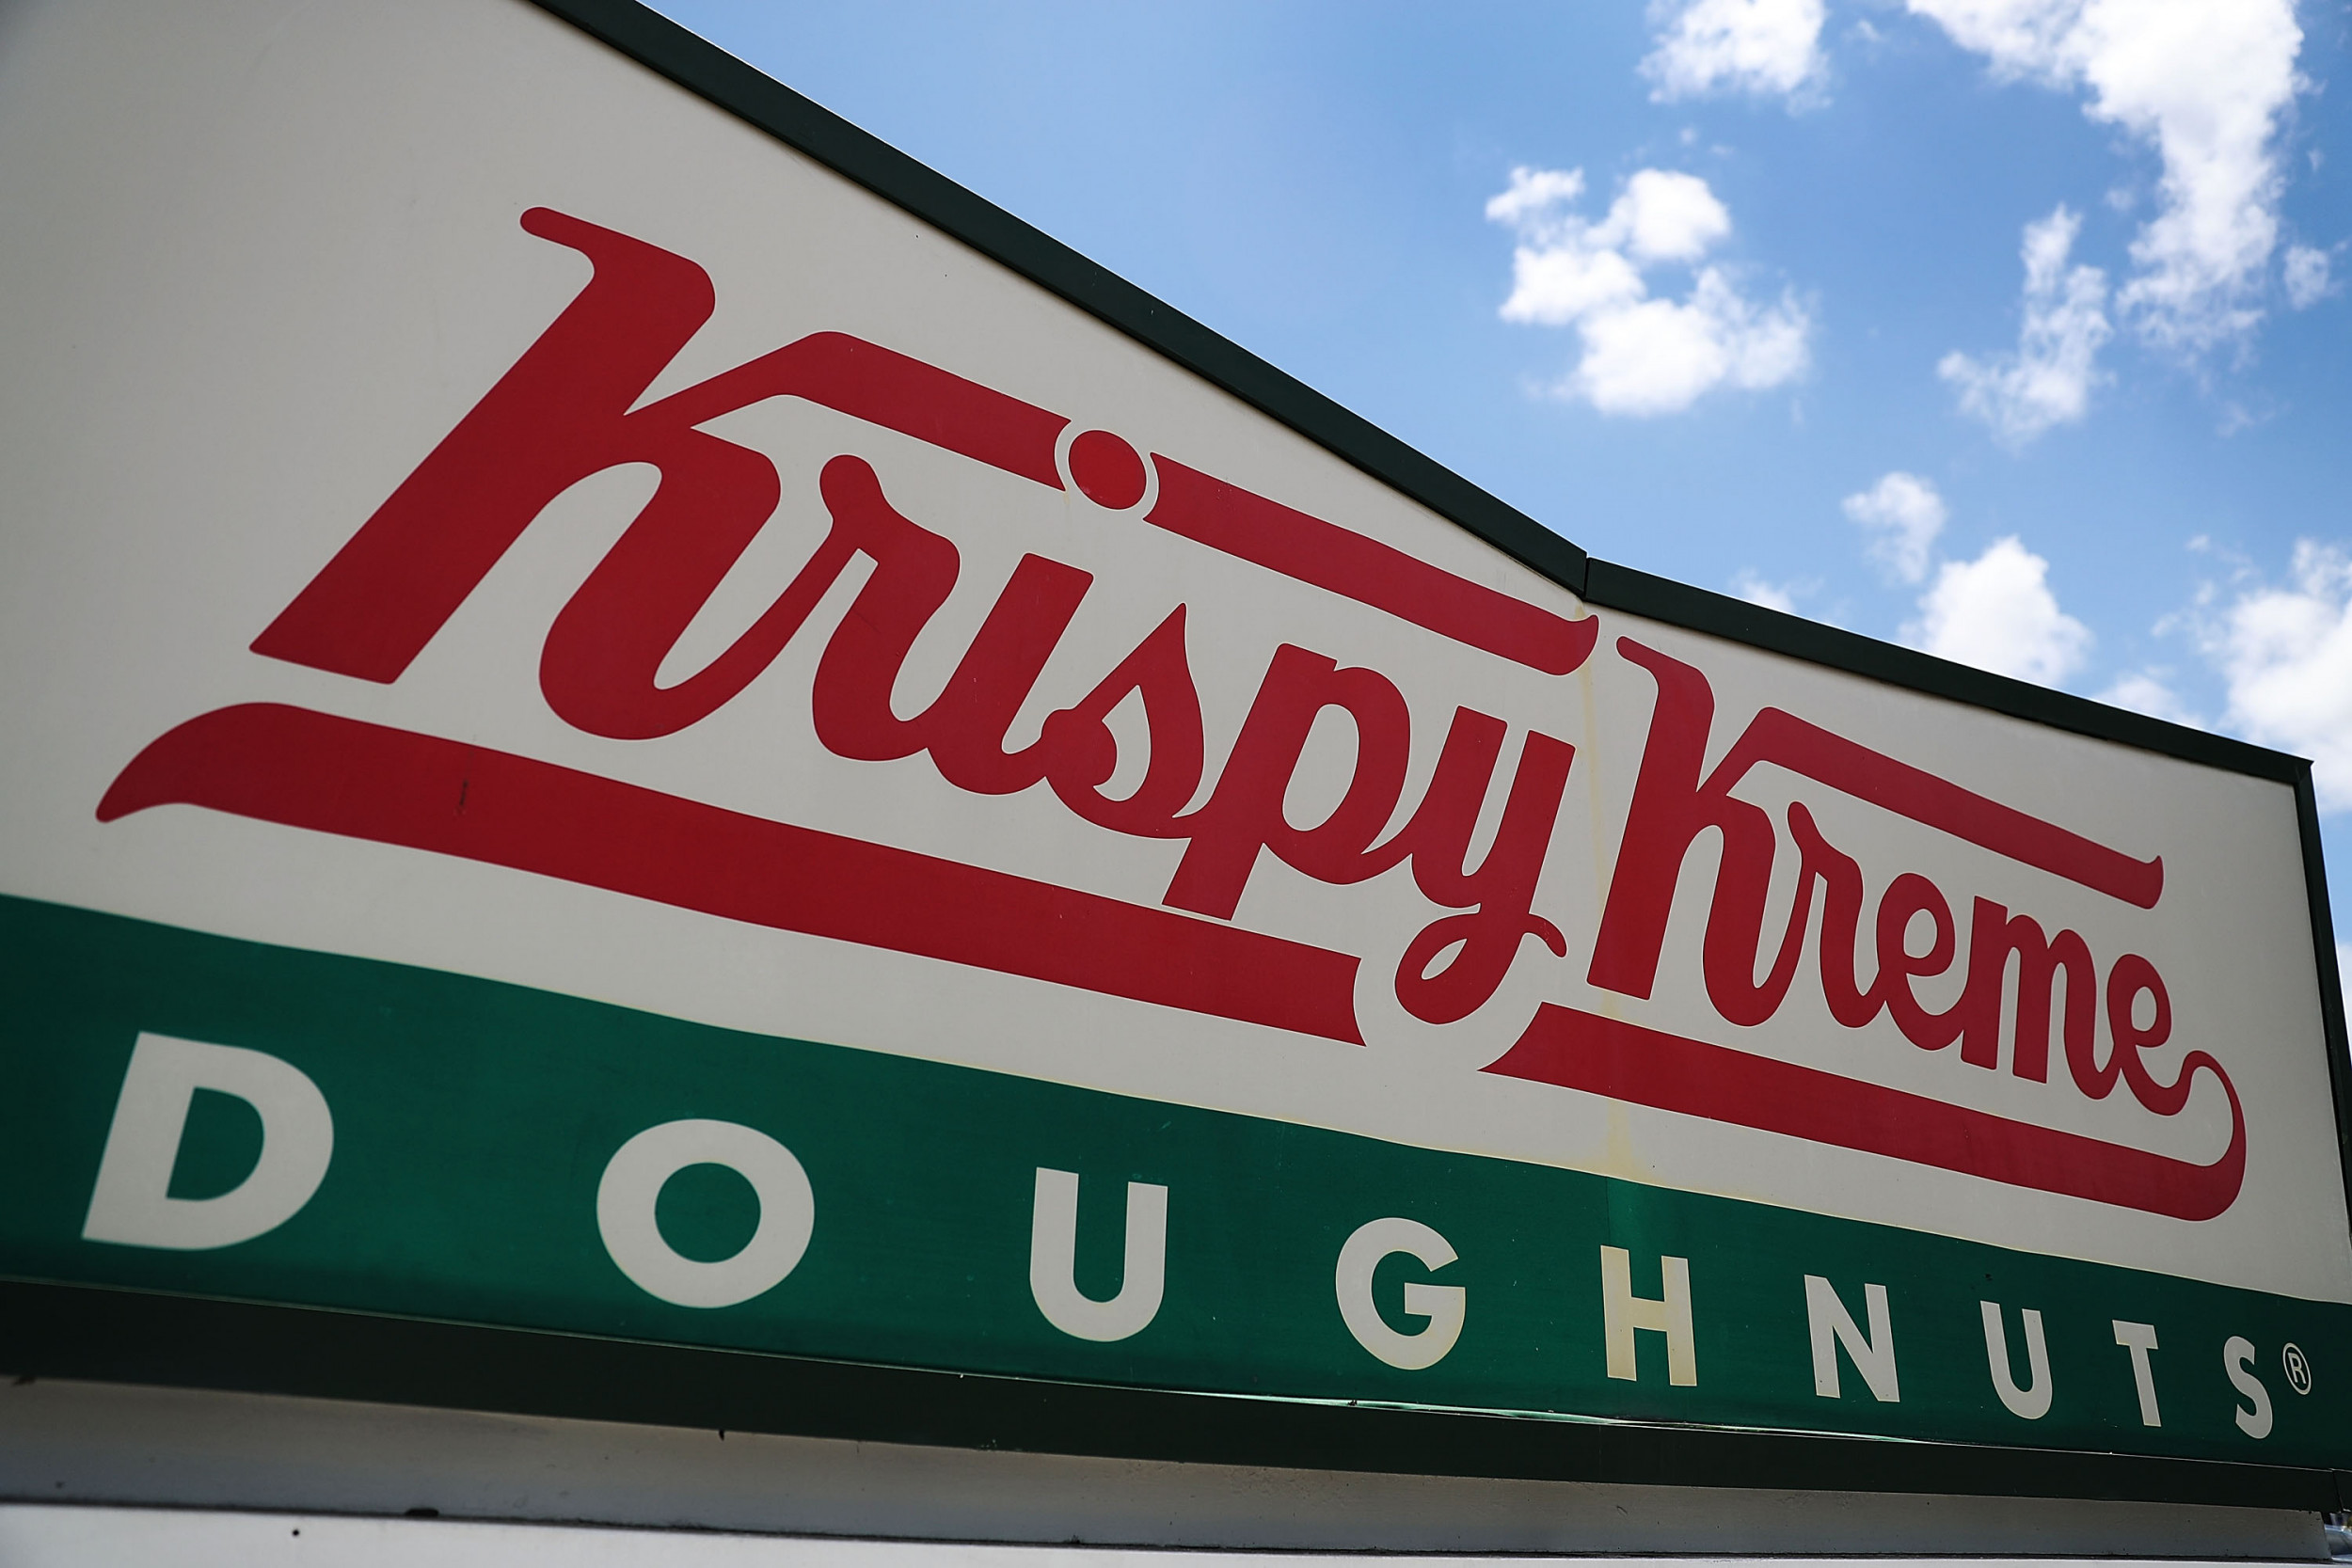 Krispy Kreme Delivery Service Free Doughnuts Being Given Away to